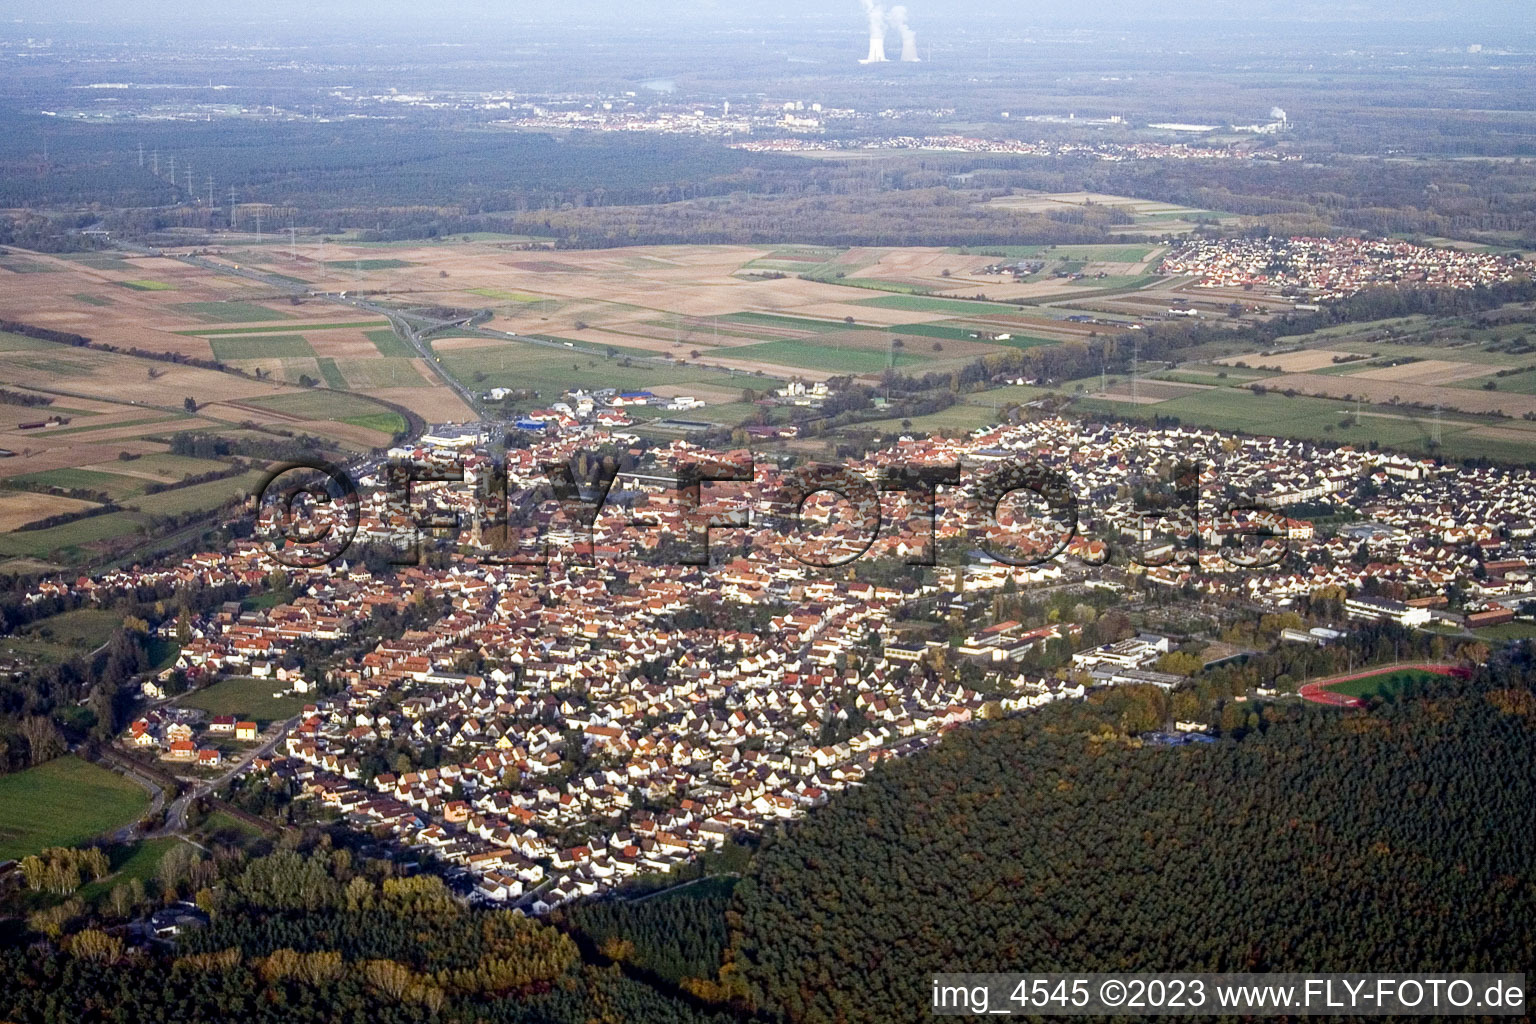 From the southwest in Rülzheim in the state Rhineland-Palatinate, Germany